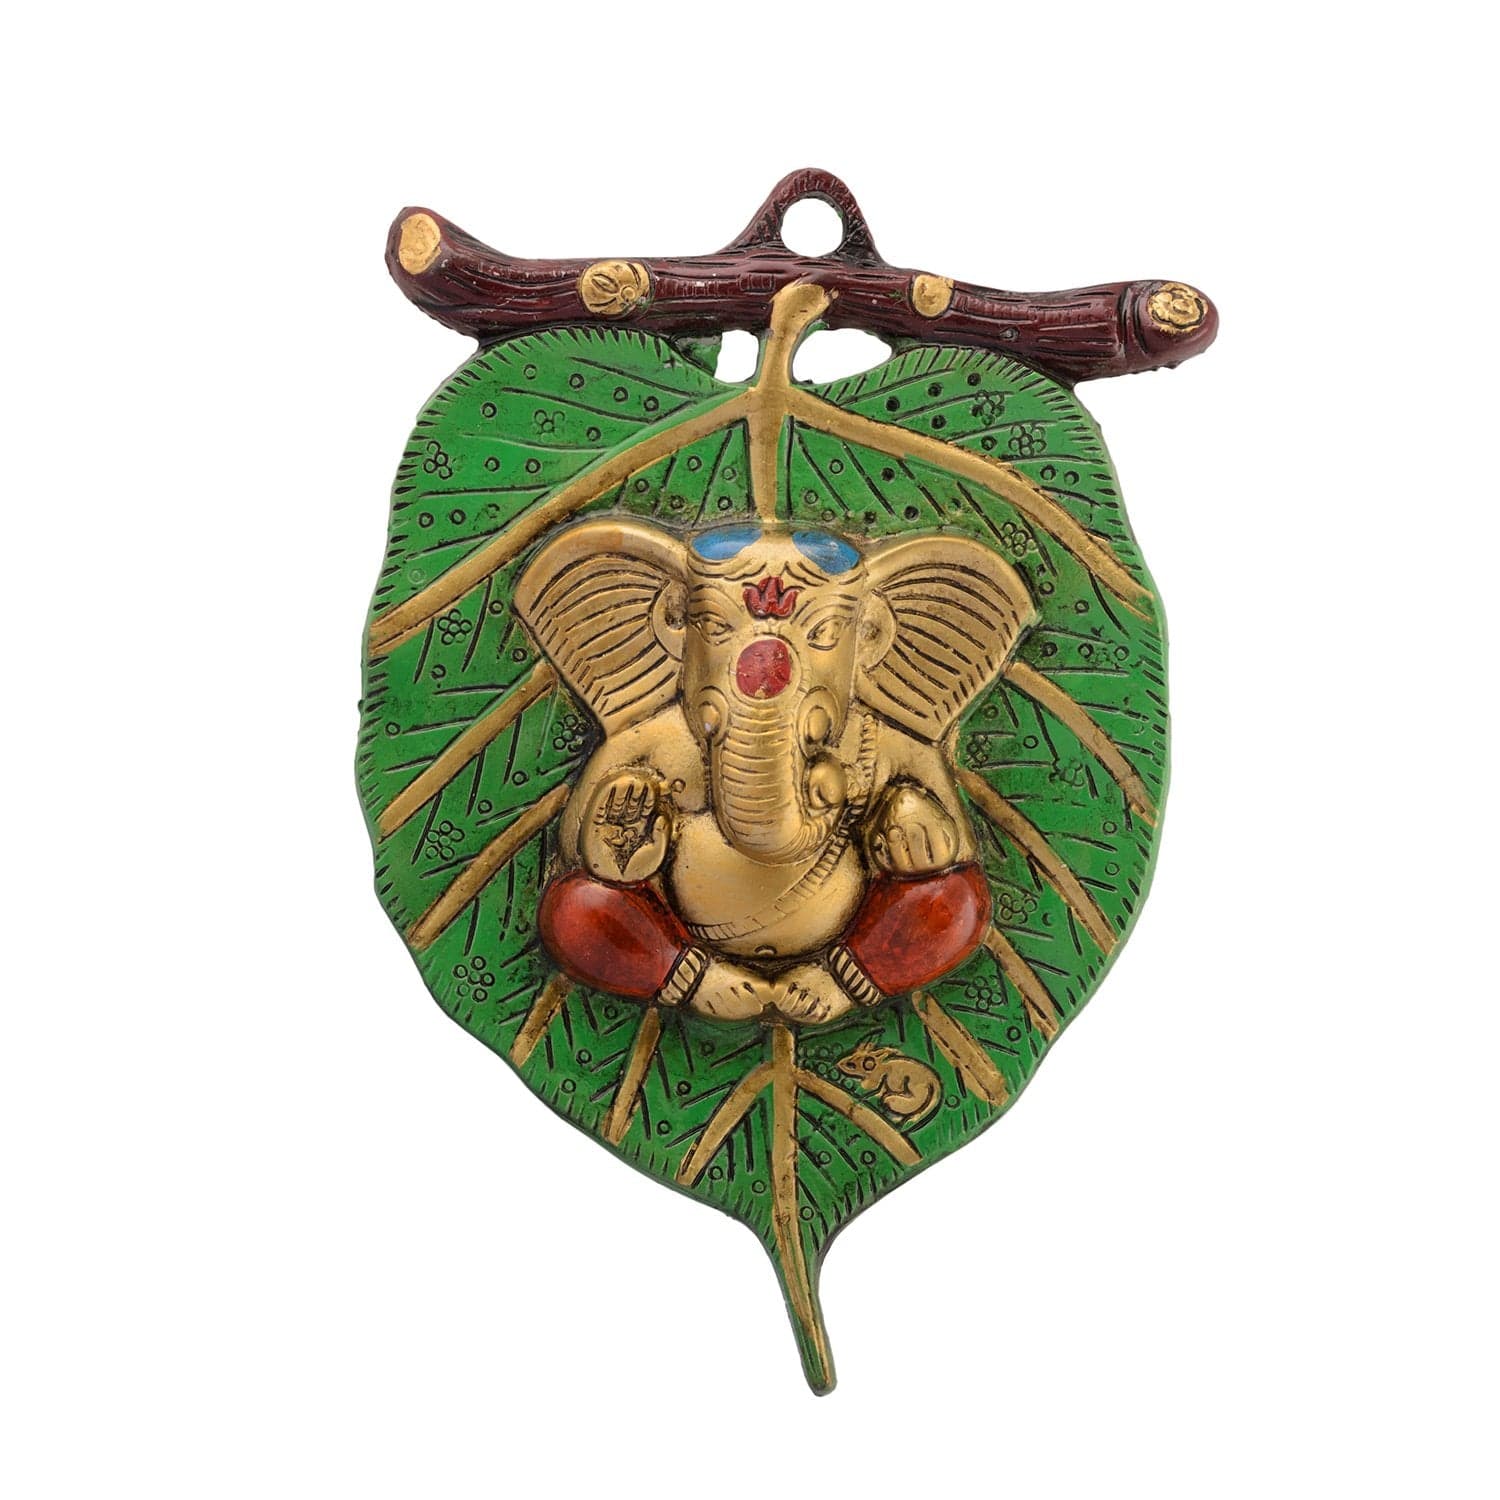 eCraftIndia Golden Metal Lord Ganesha in Red Dhoti on Green Leaf Wall Hanging Decorative showpiece for Home Decor, Wall Decor, Pooja Room Temple & Housewarming, Festival Gift - YuvaFlowers